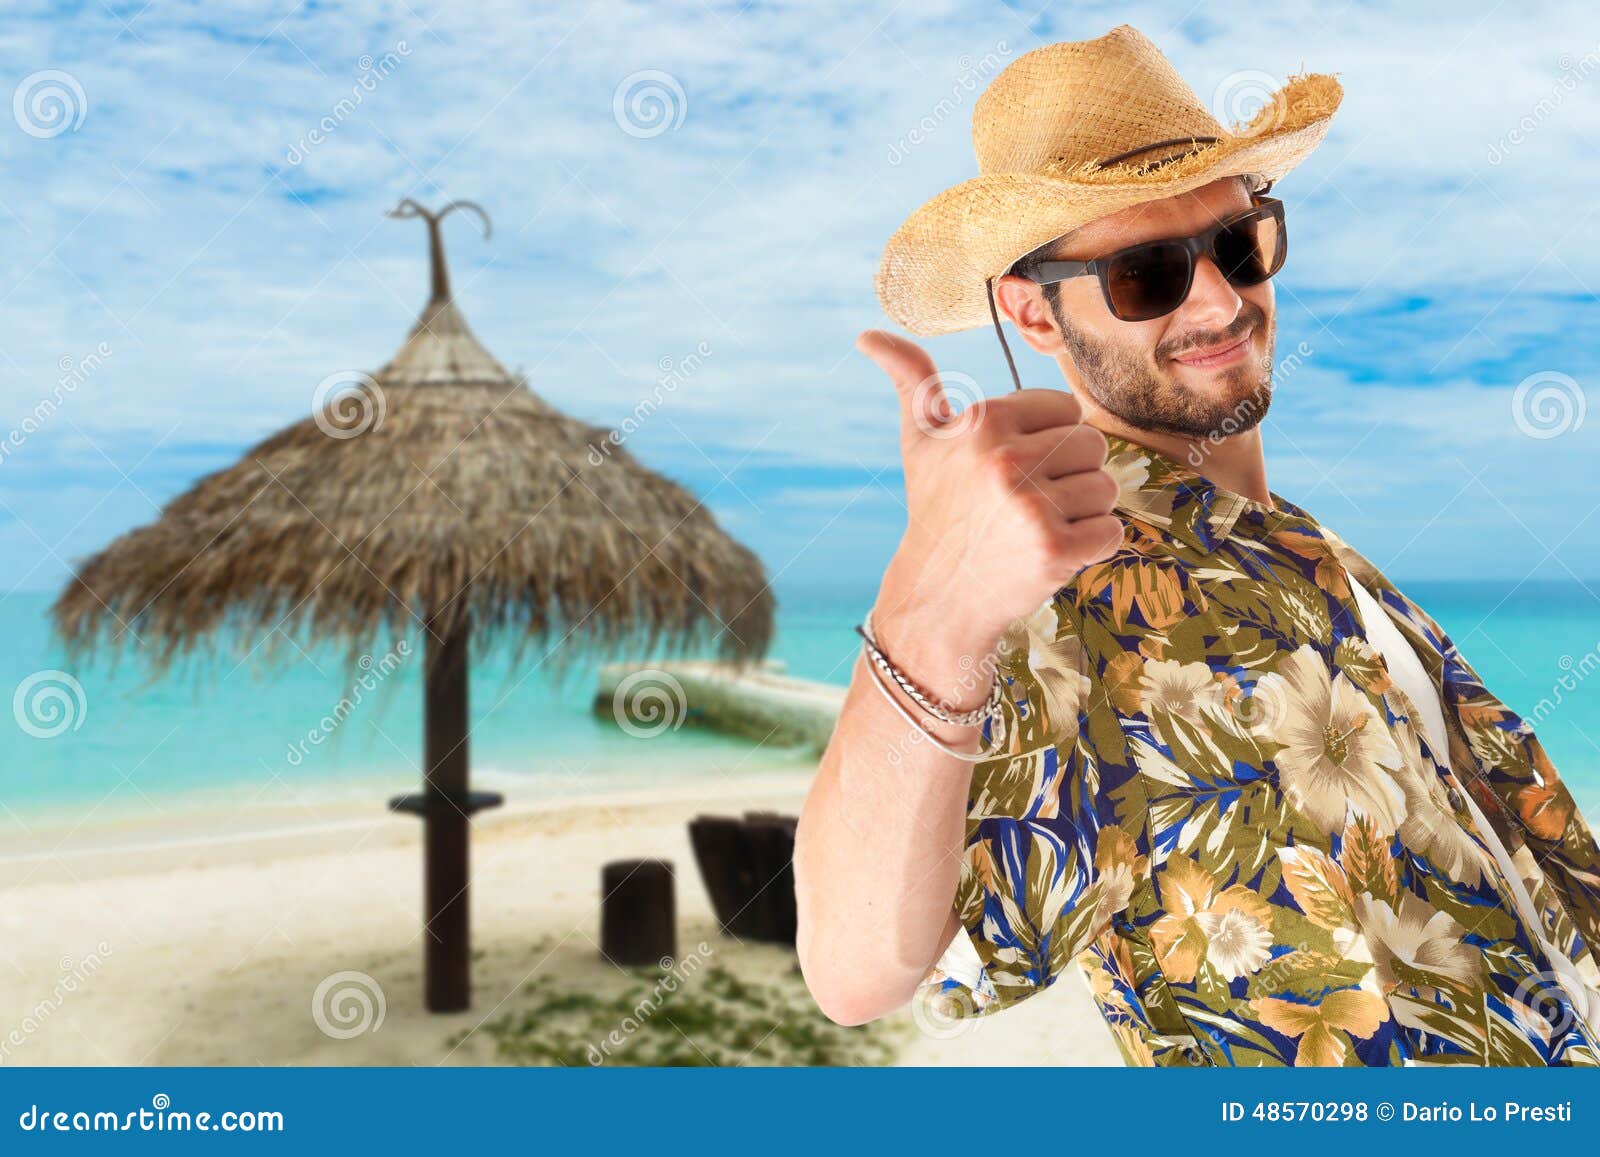 young-guy-vacation-attractive-male-colorful-outfit-tropical-island-setting-as-stereotype-tourist-48570298.jpg